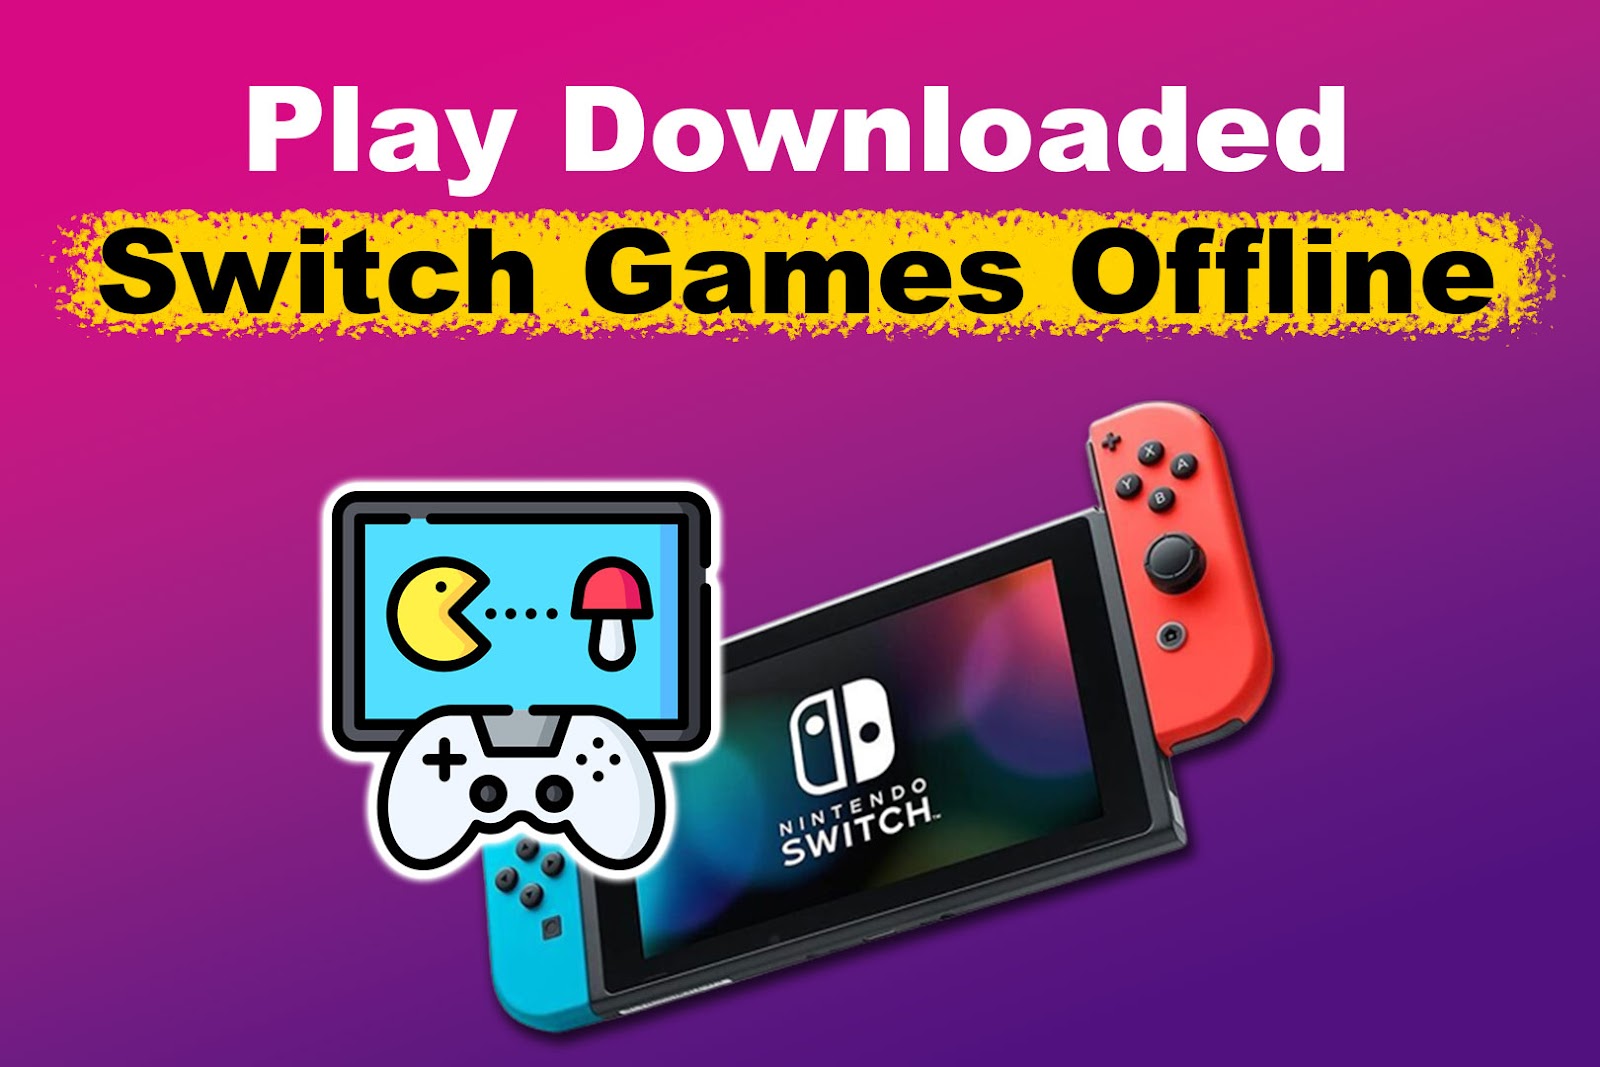 Can You Play Downloaded Switch Games Offline